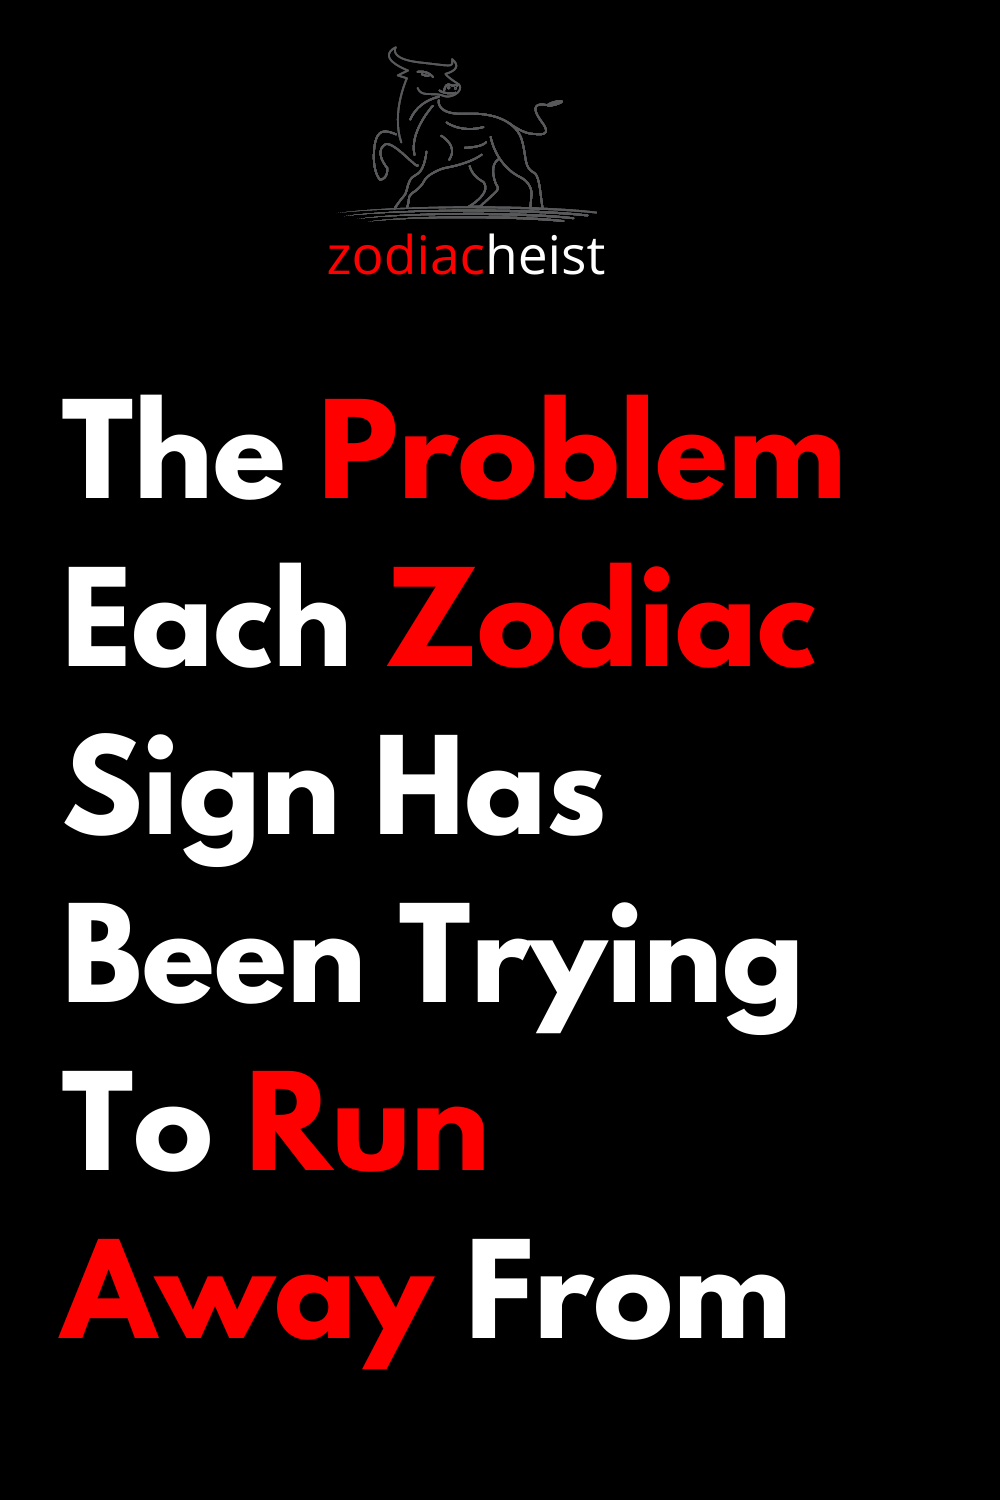 The Problem Each Zodiac Sign Has Been Trying To Run Away From